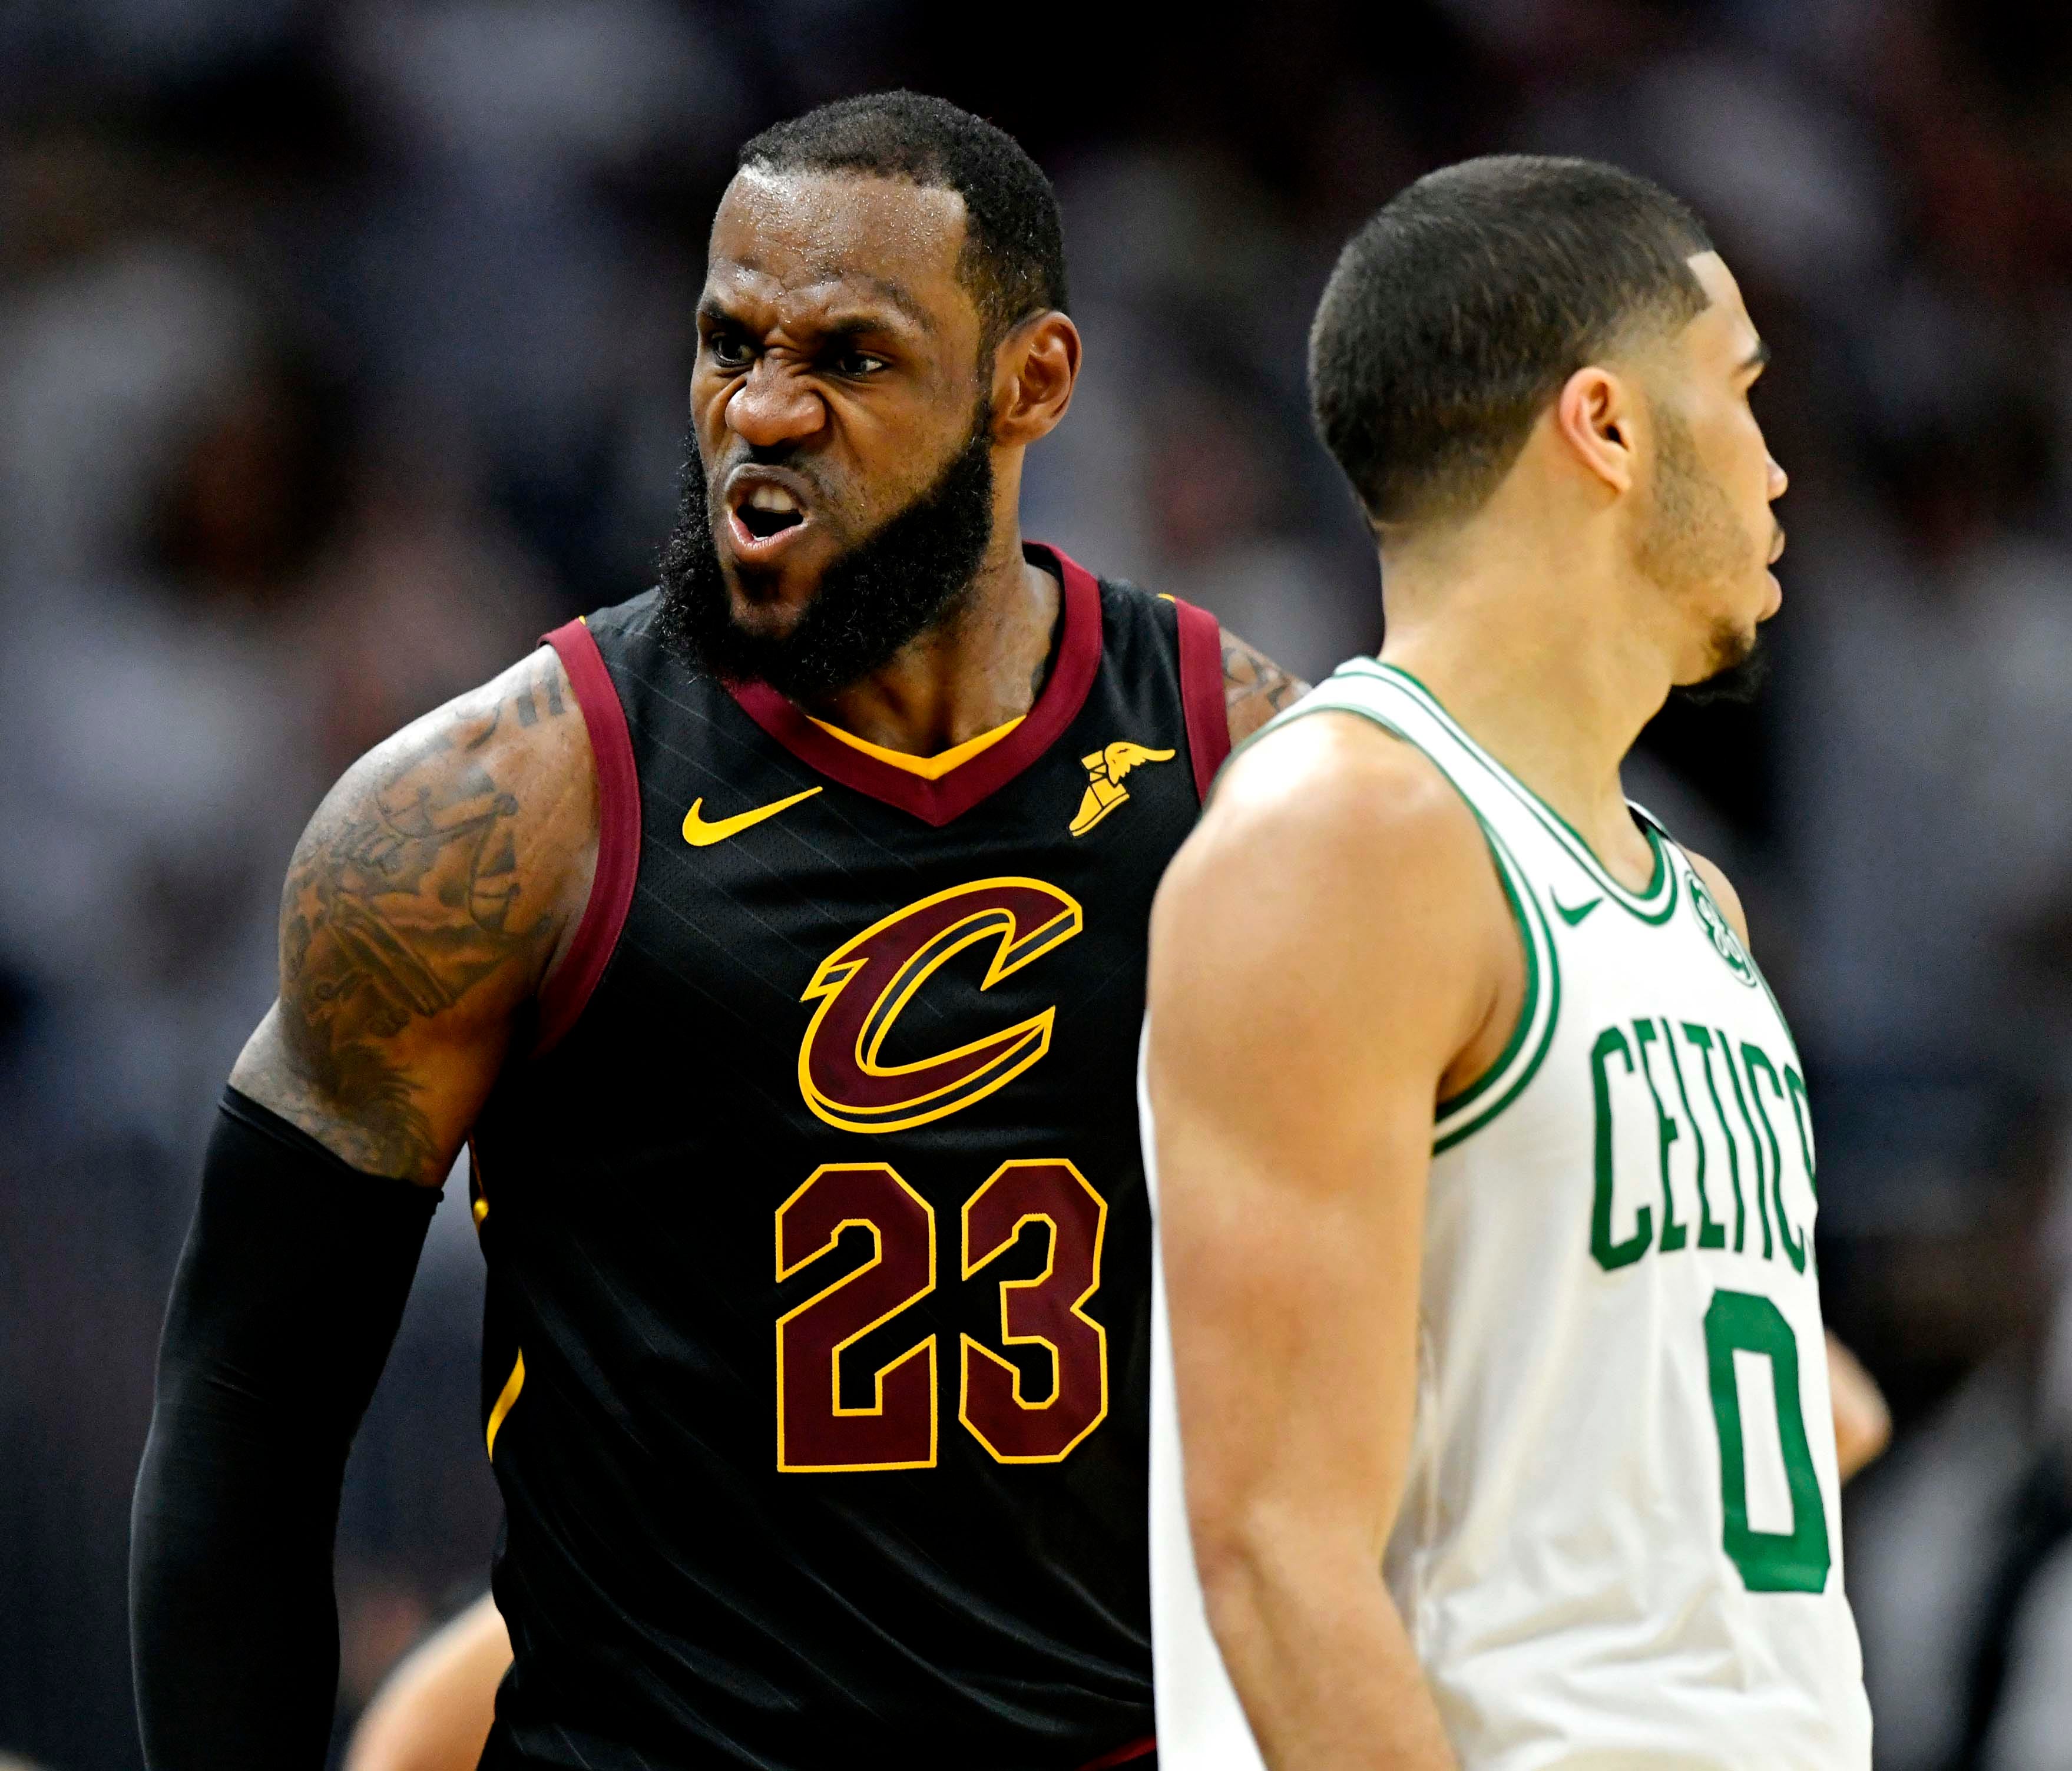 Cleveland Cavaliers forward LeBron James (23) reacts after a play against the Boston Celtics in game six of the Eastern conference finals of the 2018 NBA Playoffs at Quicken Loans Arena.